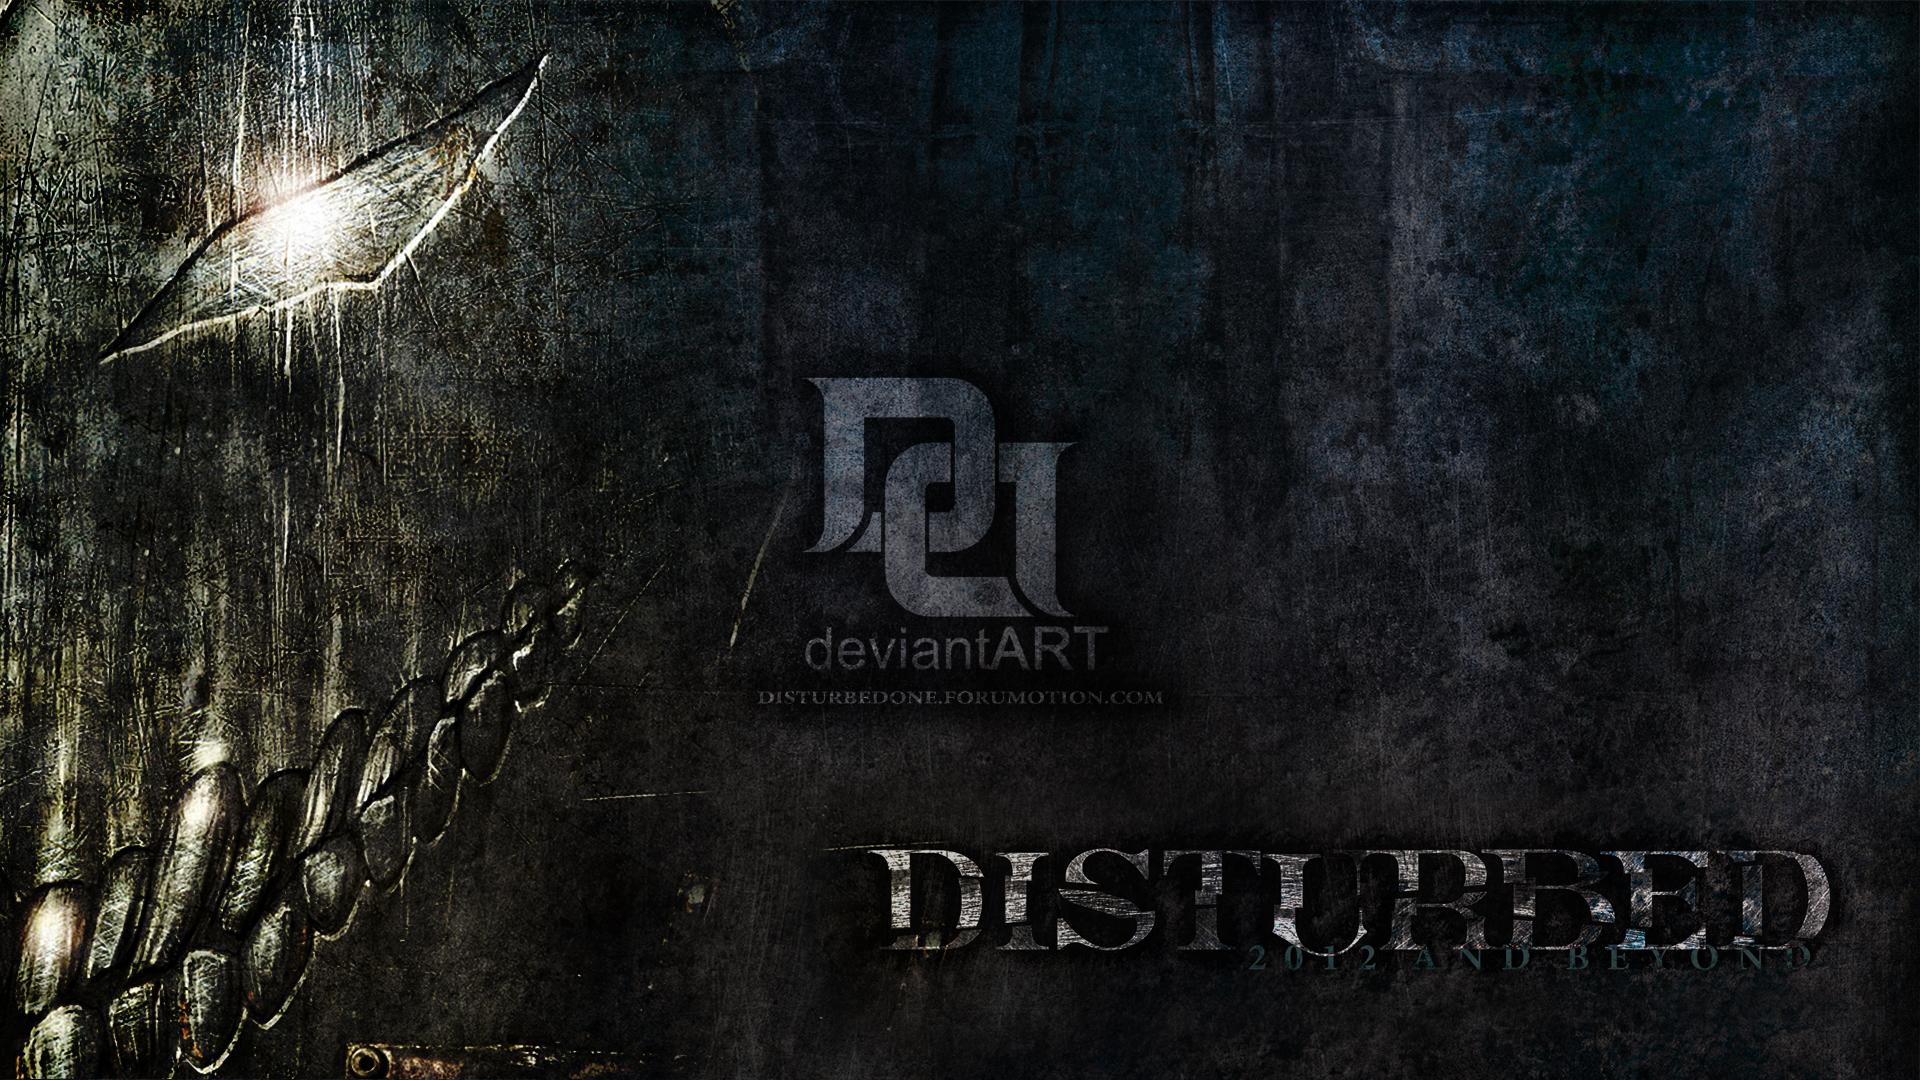 Disturbed Pationt Zero by morbustelevision2 on DeviantArt